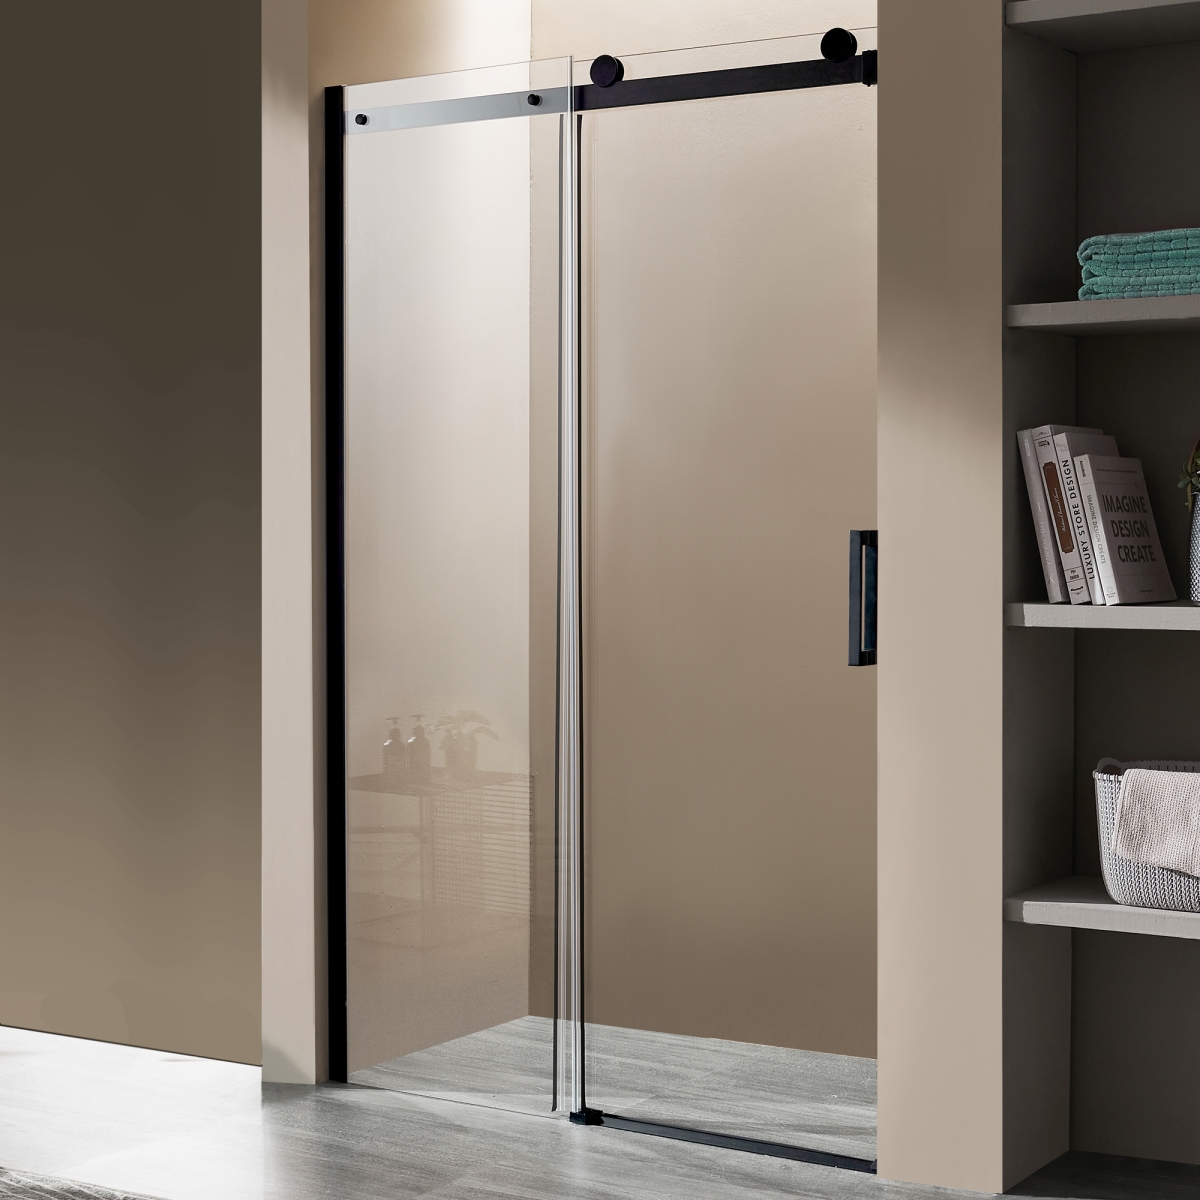 Picture of Anzzi SD-FRLS05702MB 60 x 76 in. Rhodes Series Frameless Sliding Shower Door with Handle, Matte Black